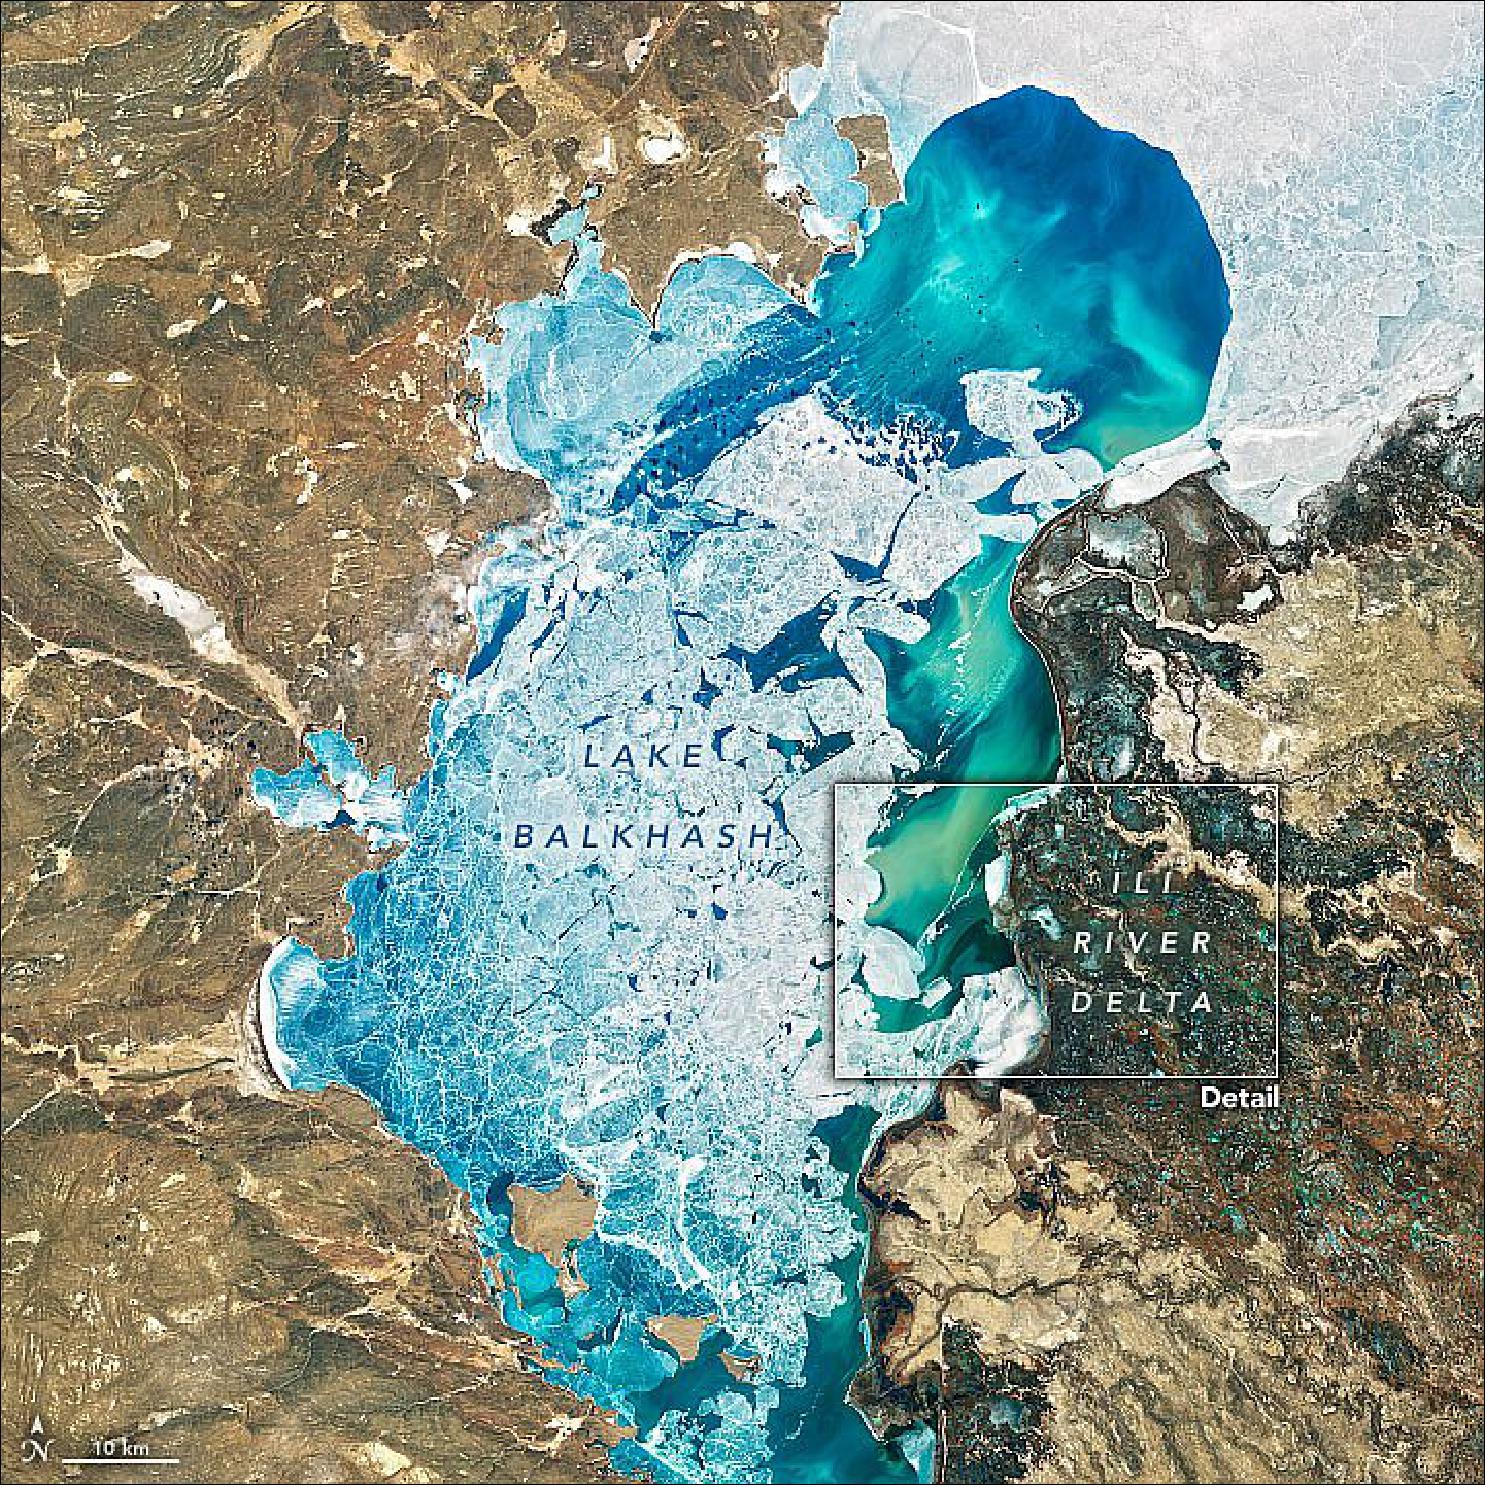 Figure 104: OLI image of Lake Balkhash with the insert of the Ili River Delta acquired ion 7 March 2020 (image credit: NASA Earth Observatory)